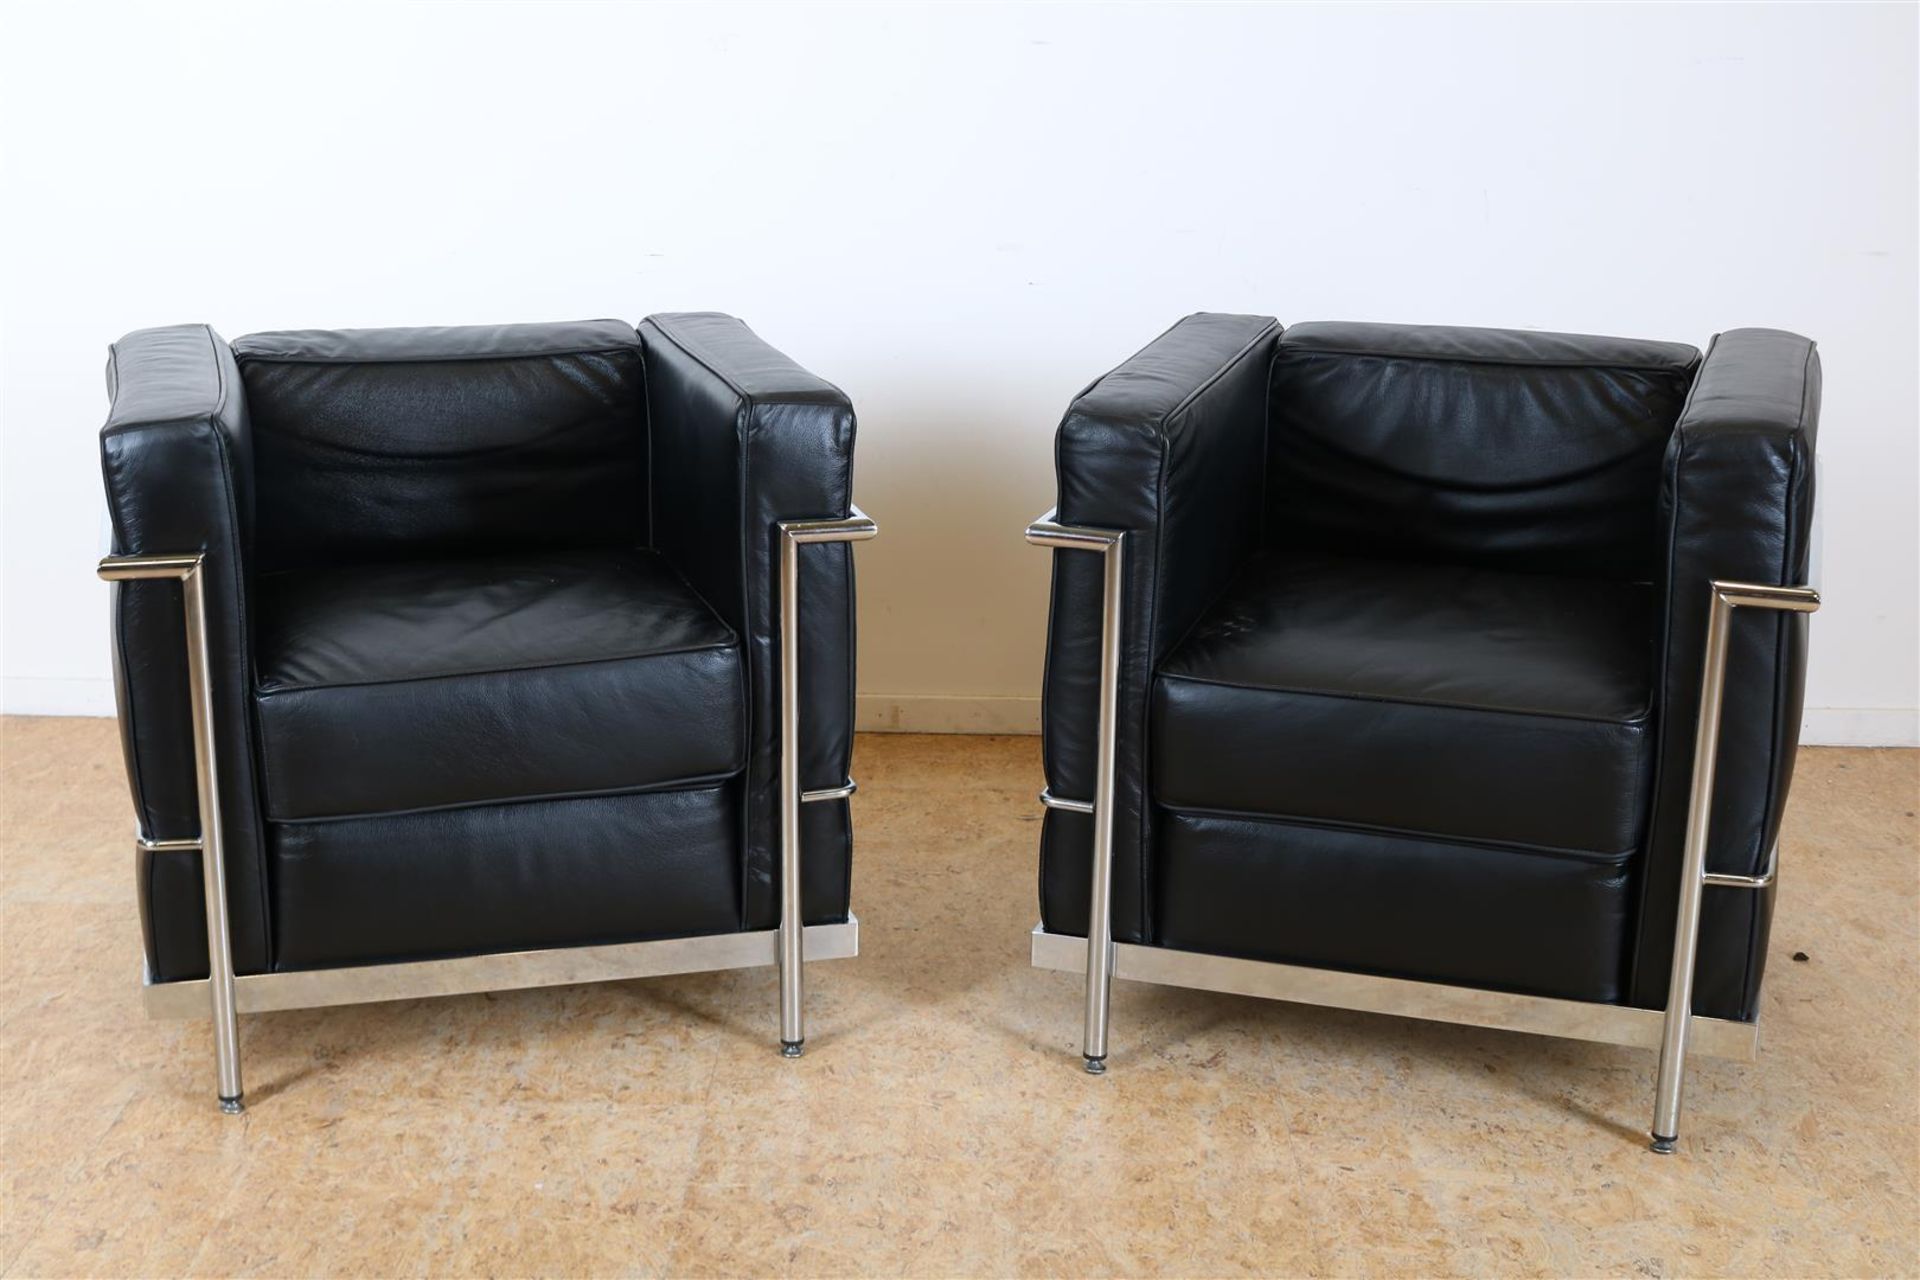 a pair of Corbusier-style fauteuils